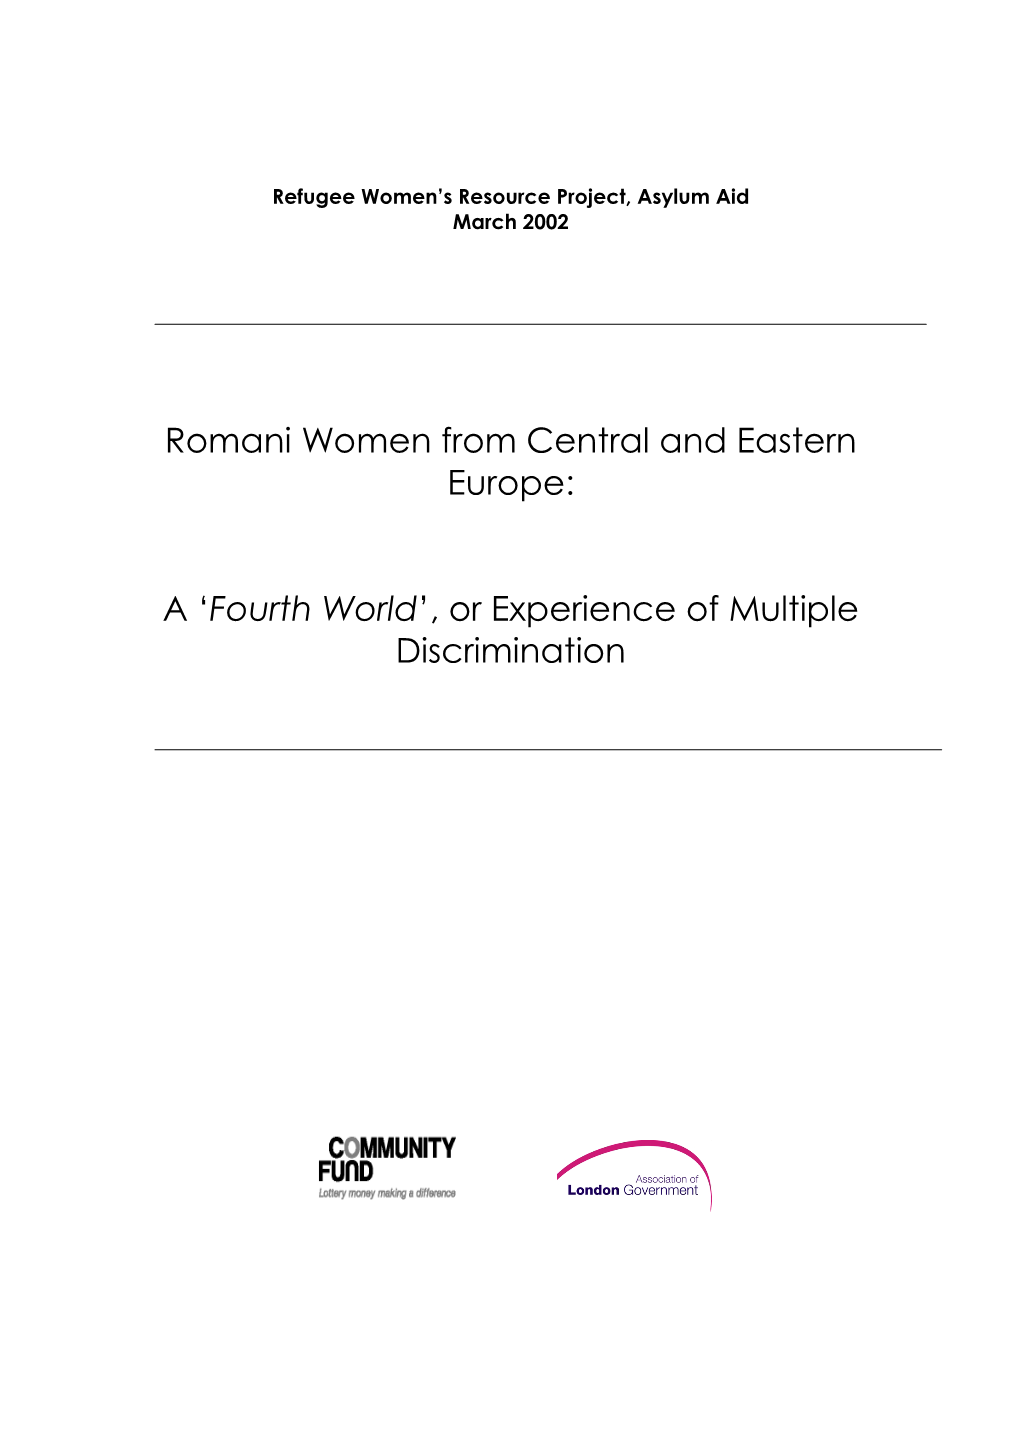 Romani Women from Central and Eastern Europe